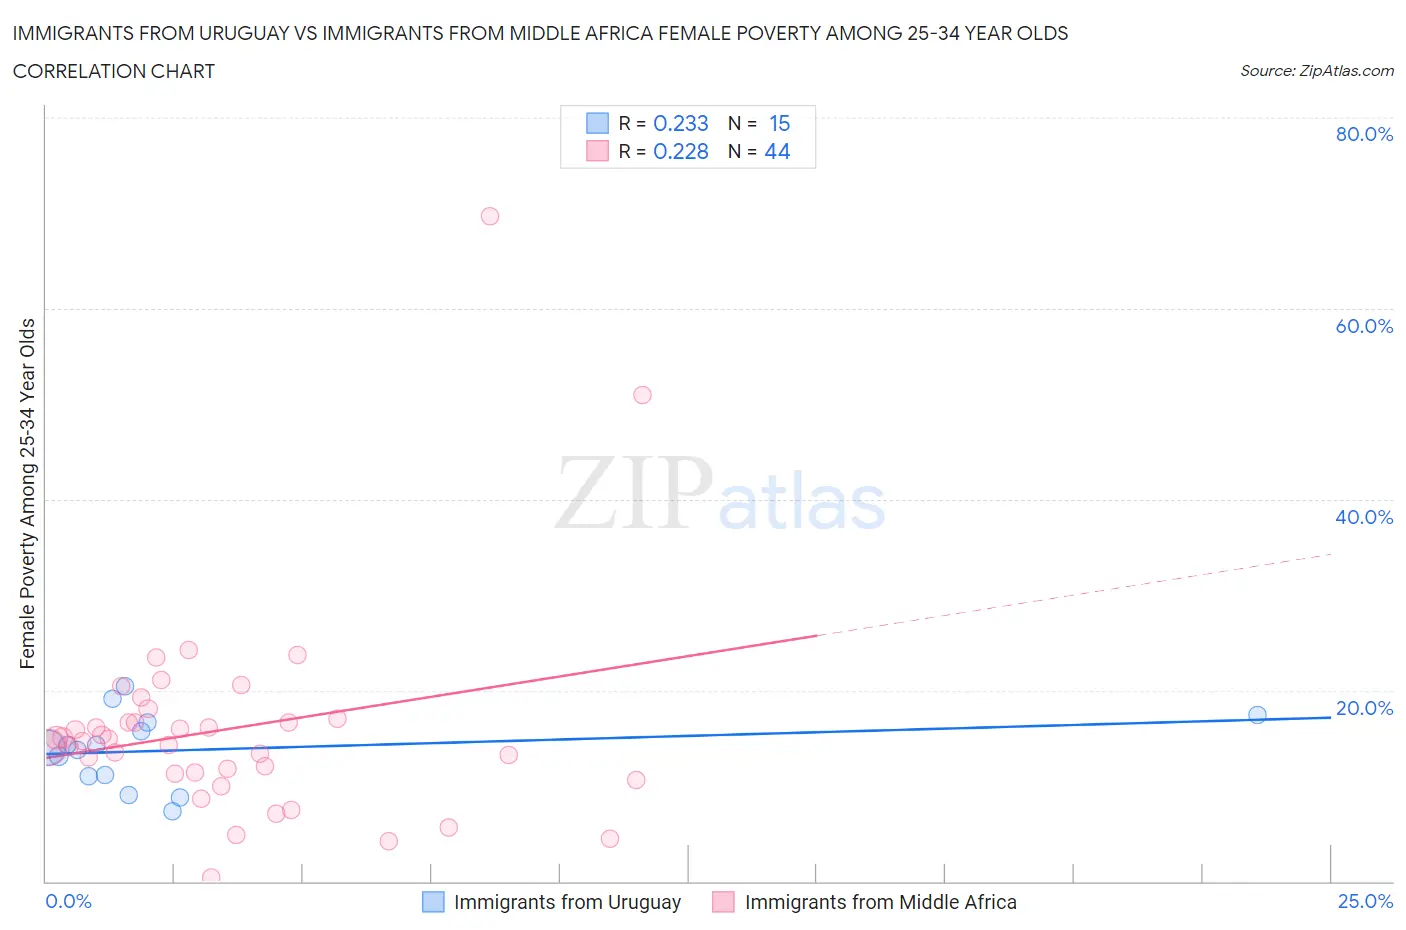 Immigrants from Uruguay vs Immigrants from Middle Africa Female Poverty Among 25-34 Year Olds